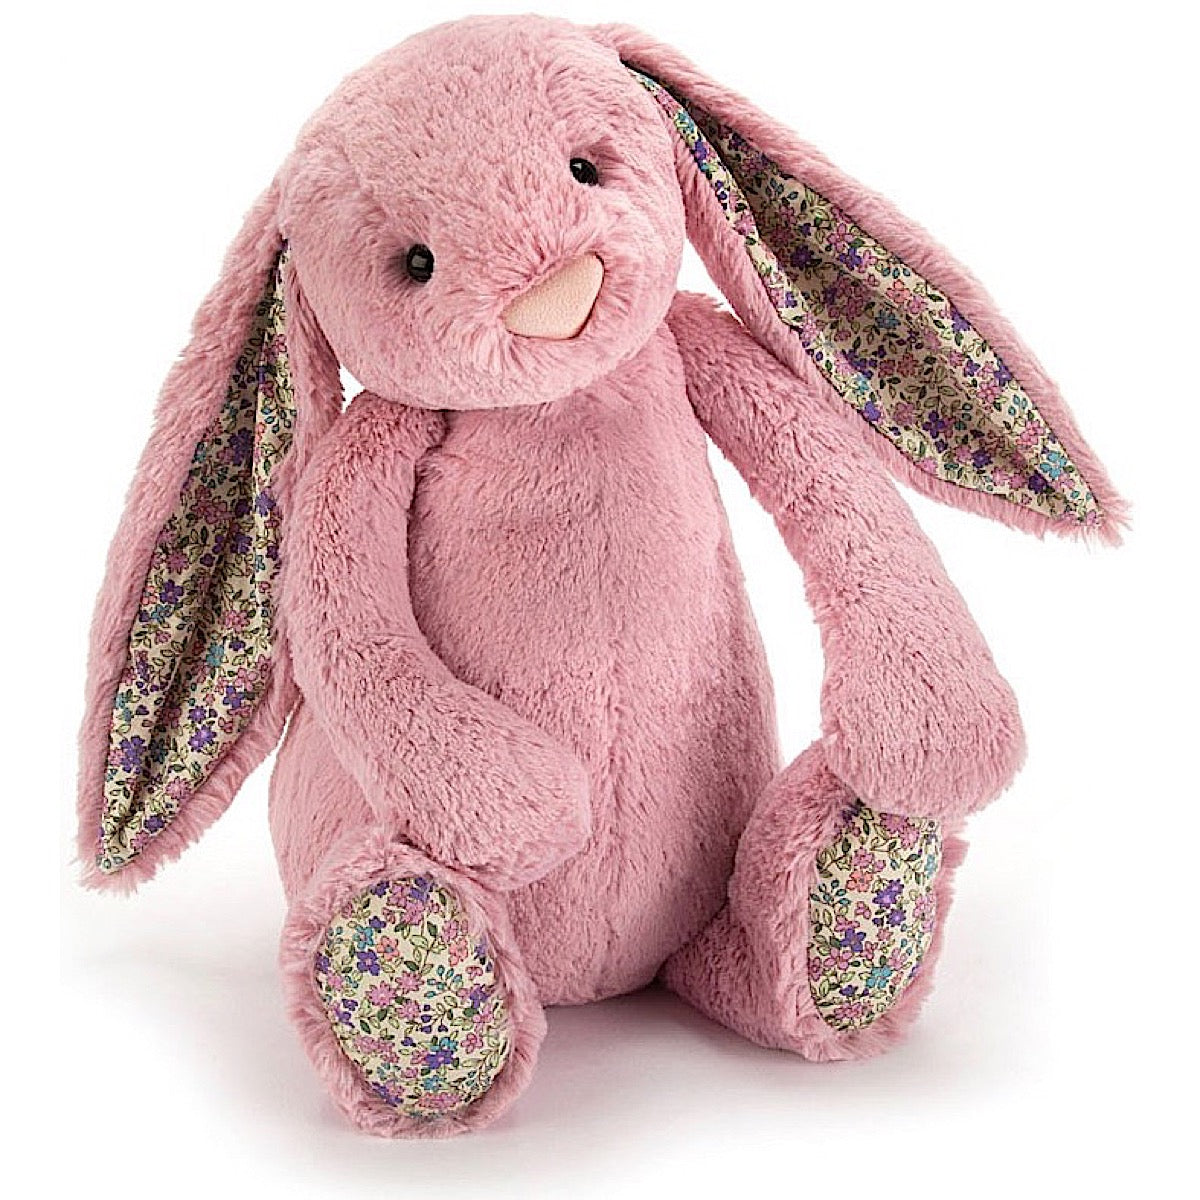 Jellycat Large Blossom Tulip Bunny - More Than Just a Gift